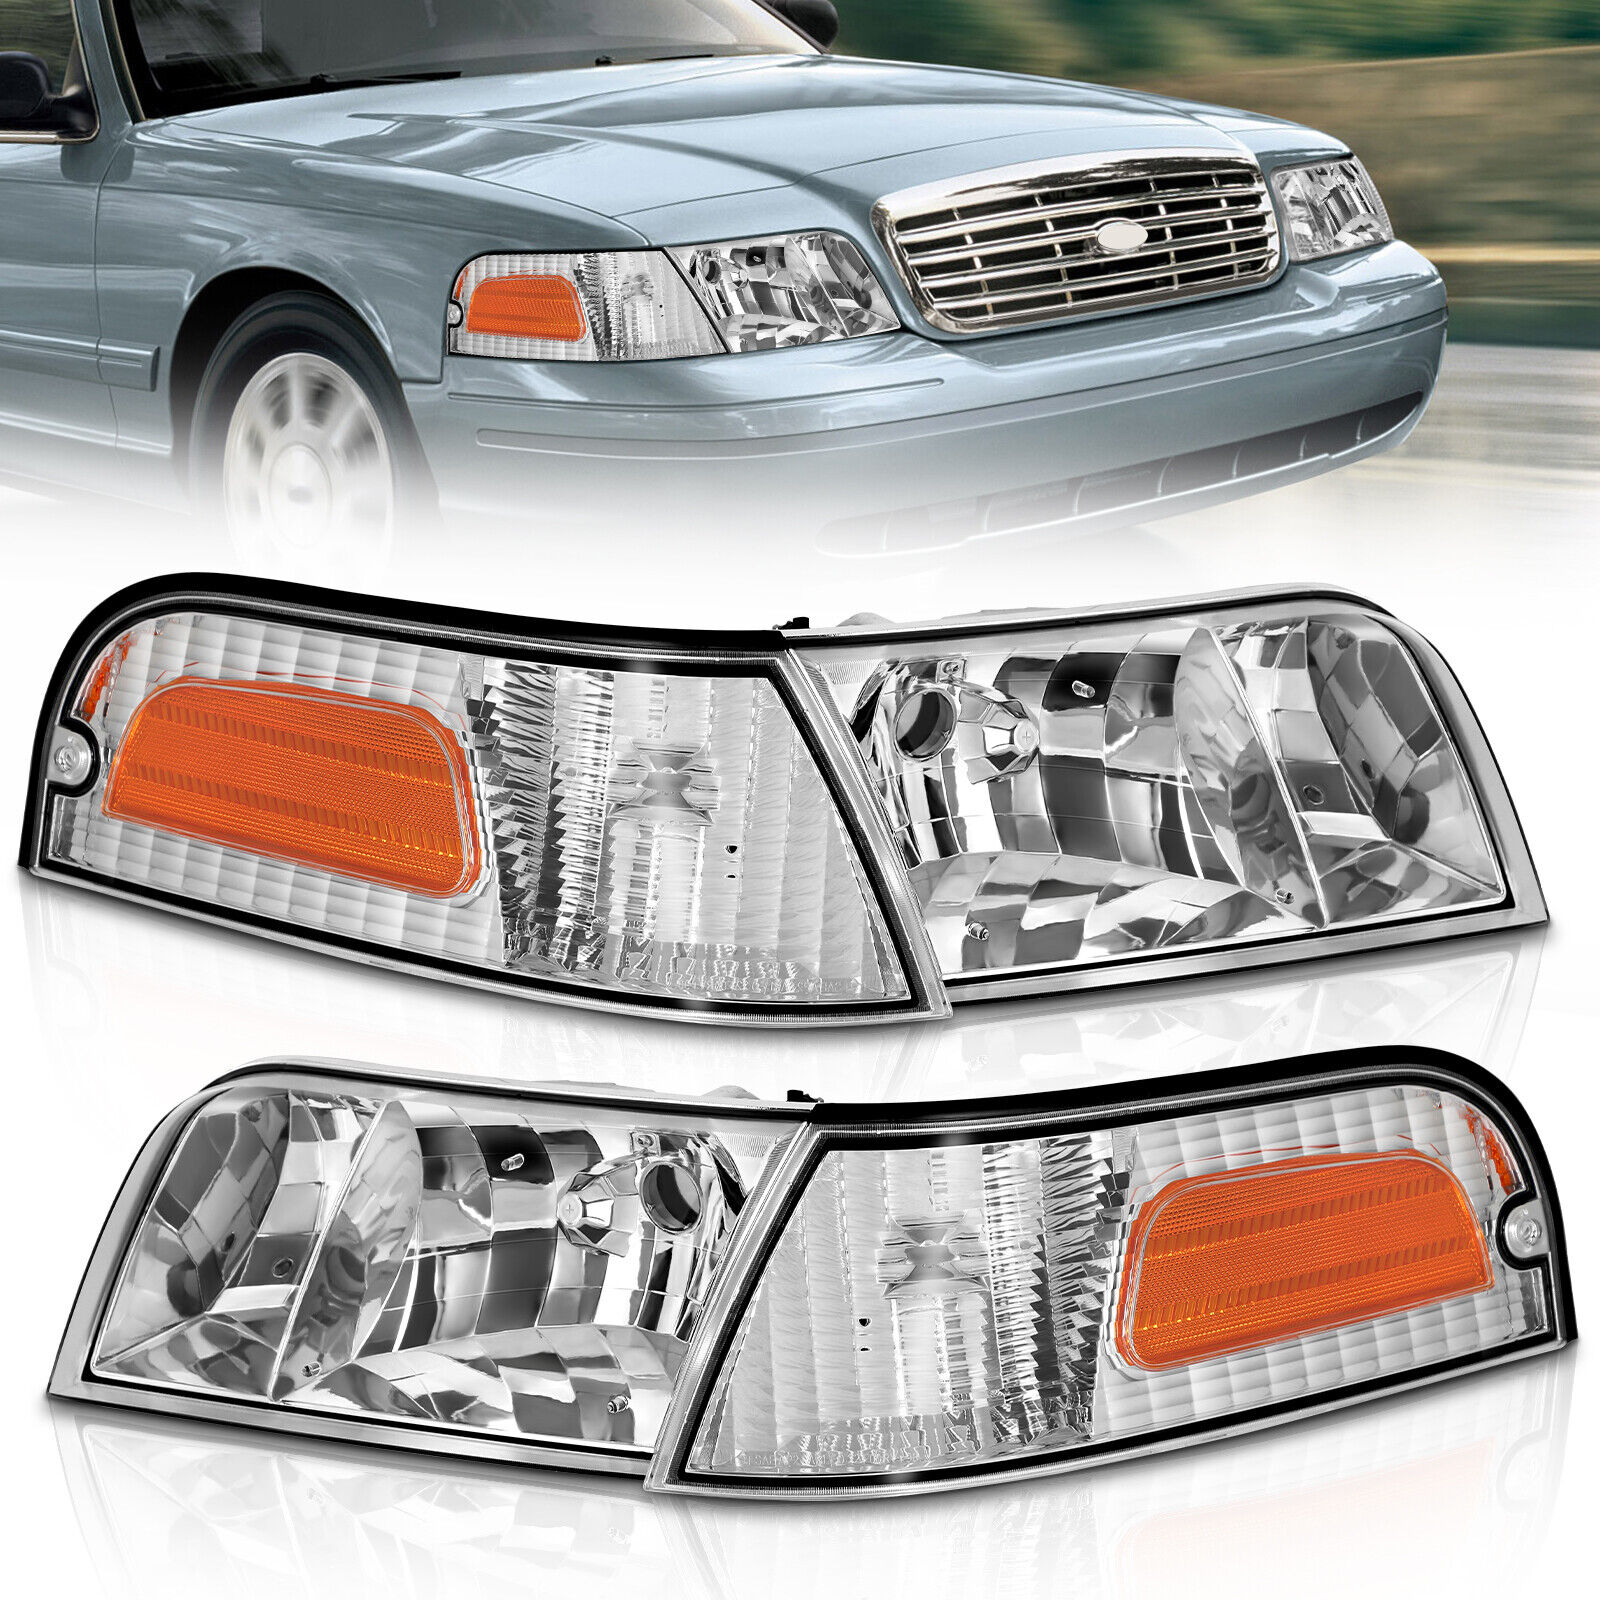 Fit 98-11 Crown Victoria Headlights w/Corner Signal Lamps 1998-2011 Left + Right